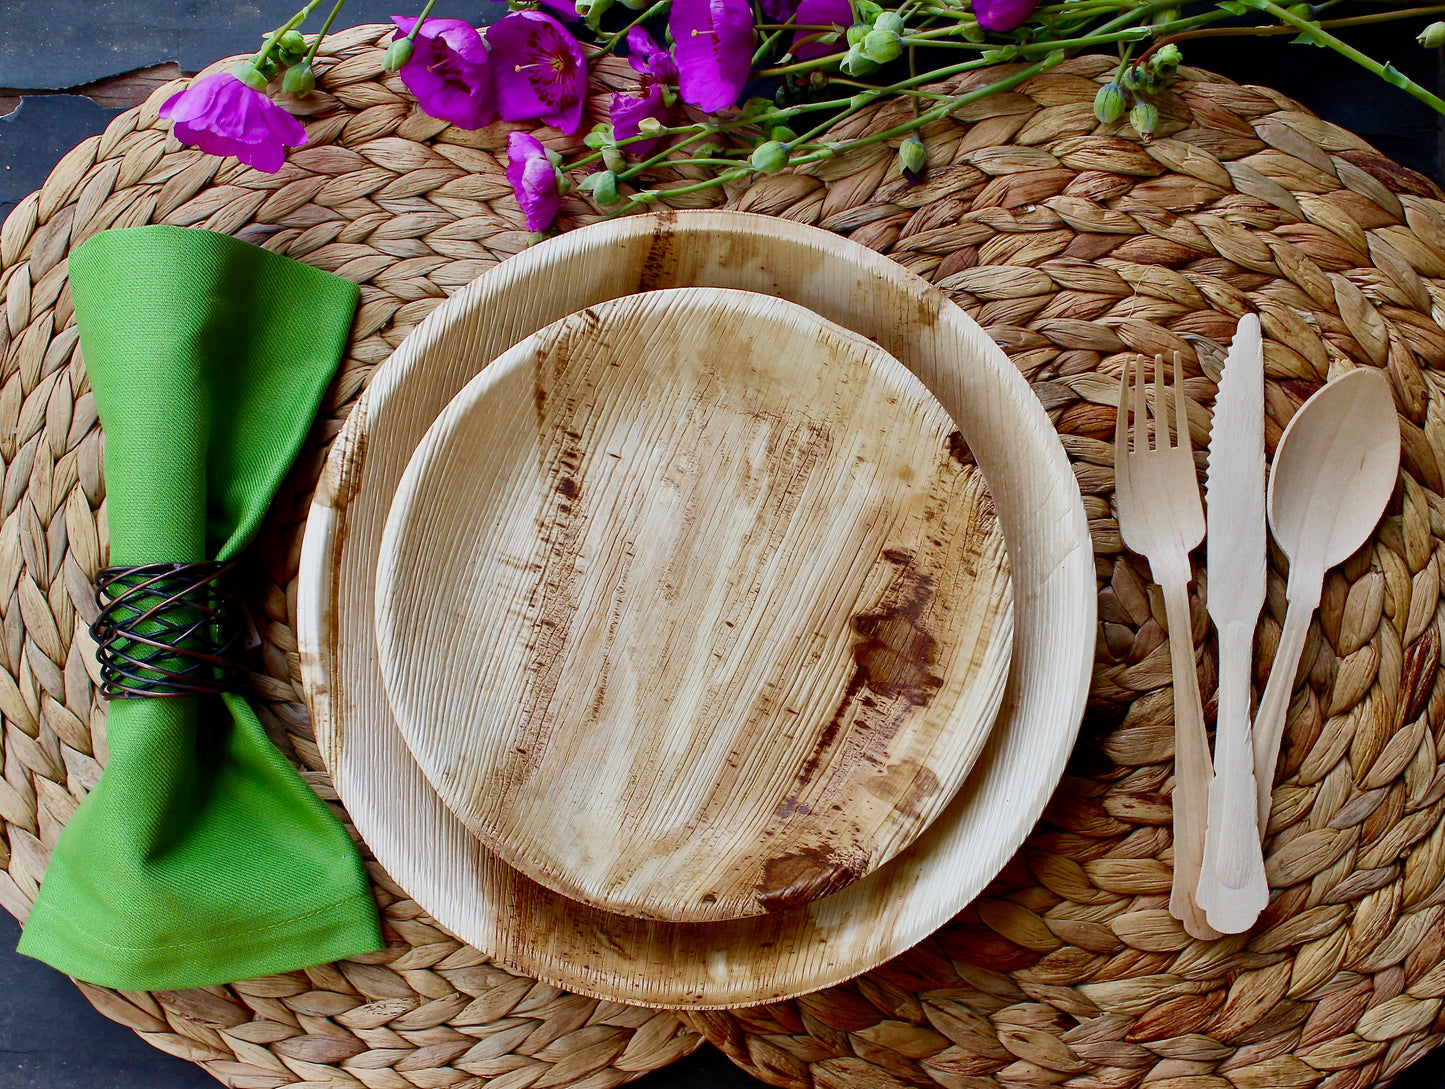 Bamboo type Palm leaf plate 25 Square  10" - 25 Heart 6"- 25 pic Square 6"- 30 napkin  - 75 Pic Utensils - 25 Coup - 25 pic napkin